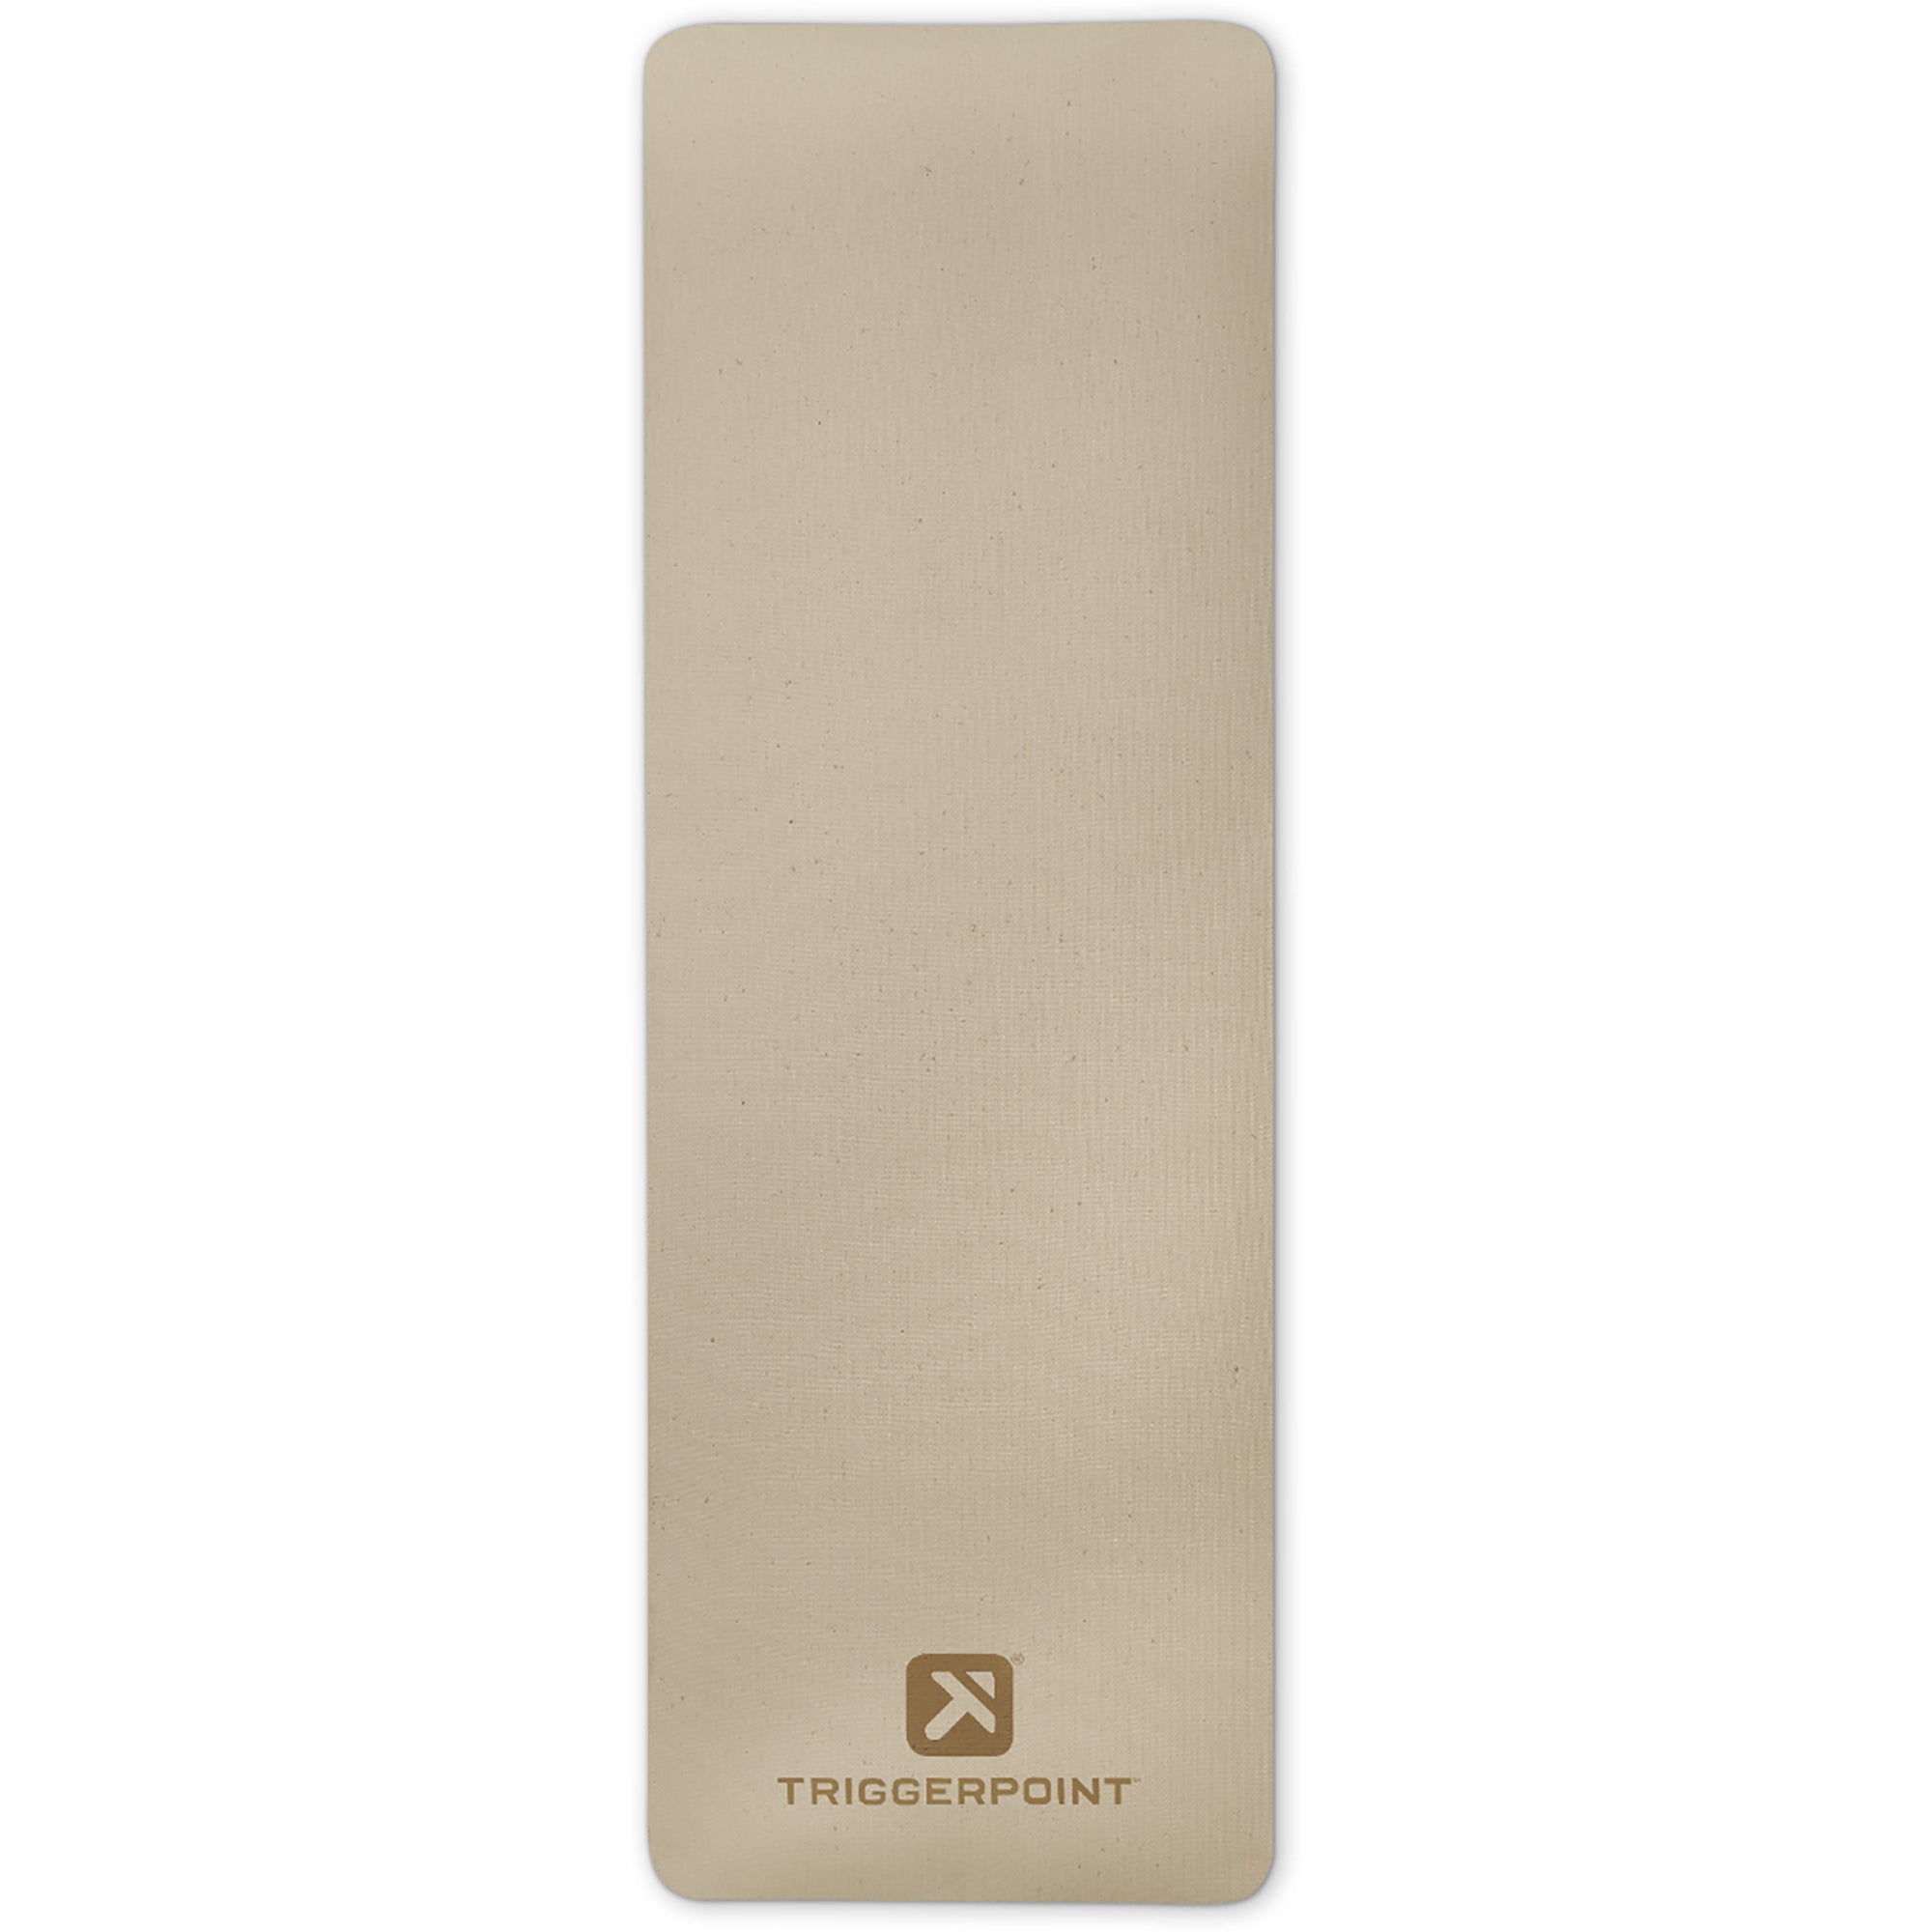 TriggerPoint Eco 5mm Yoga and Exercise Mat - 72" x 24" TriggerPoint